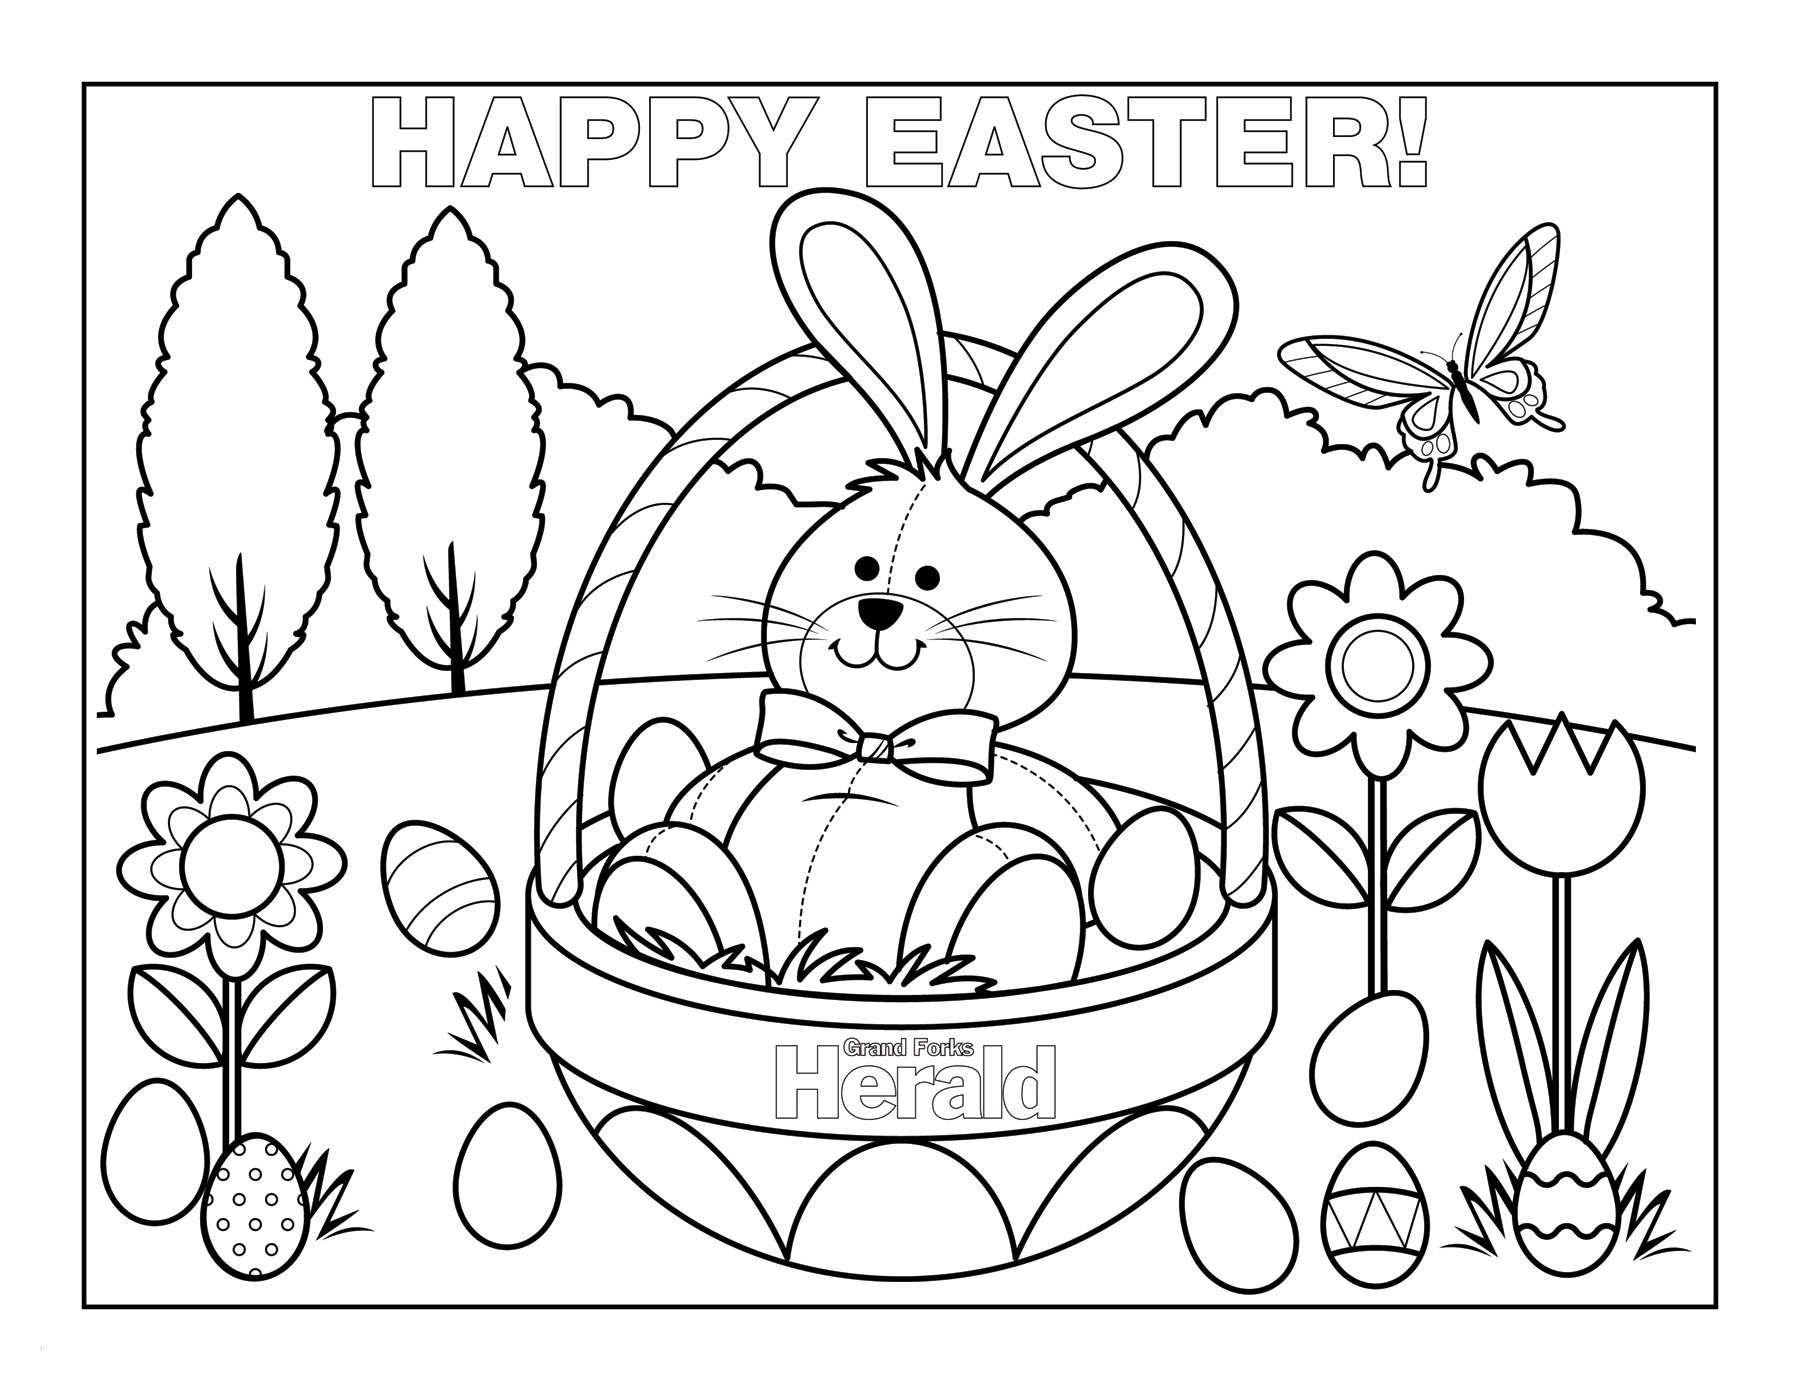 Coloring Pages Easter Printable Best Of Free Printable Easter - Free Printable Easter Coloring Pictures